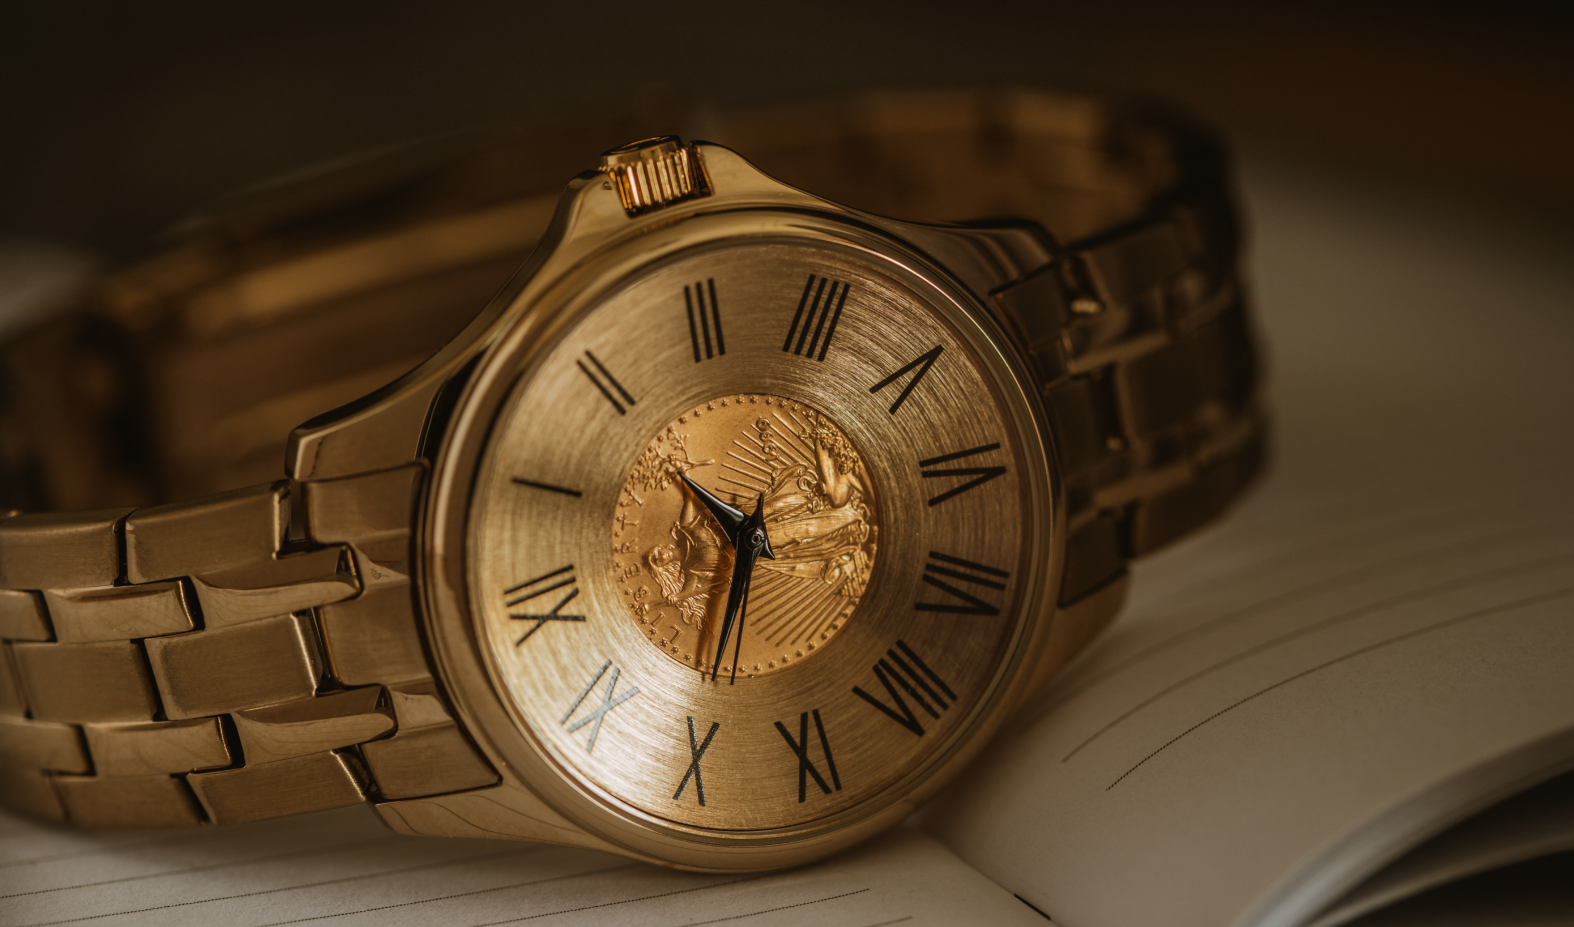   The coin watch connects tradition with history, and with just a glance, serves as a constant reminder of some of the most favoured and timeless coins.